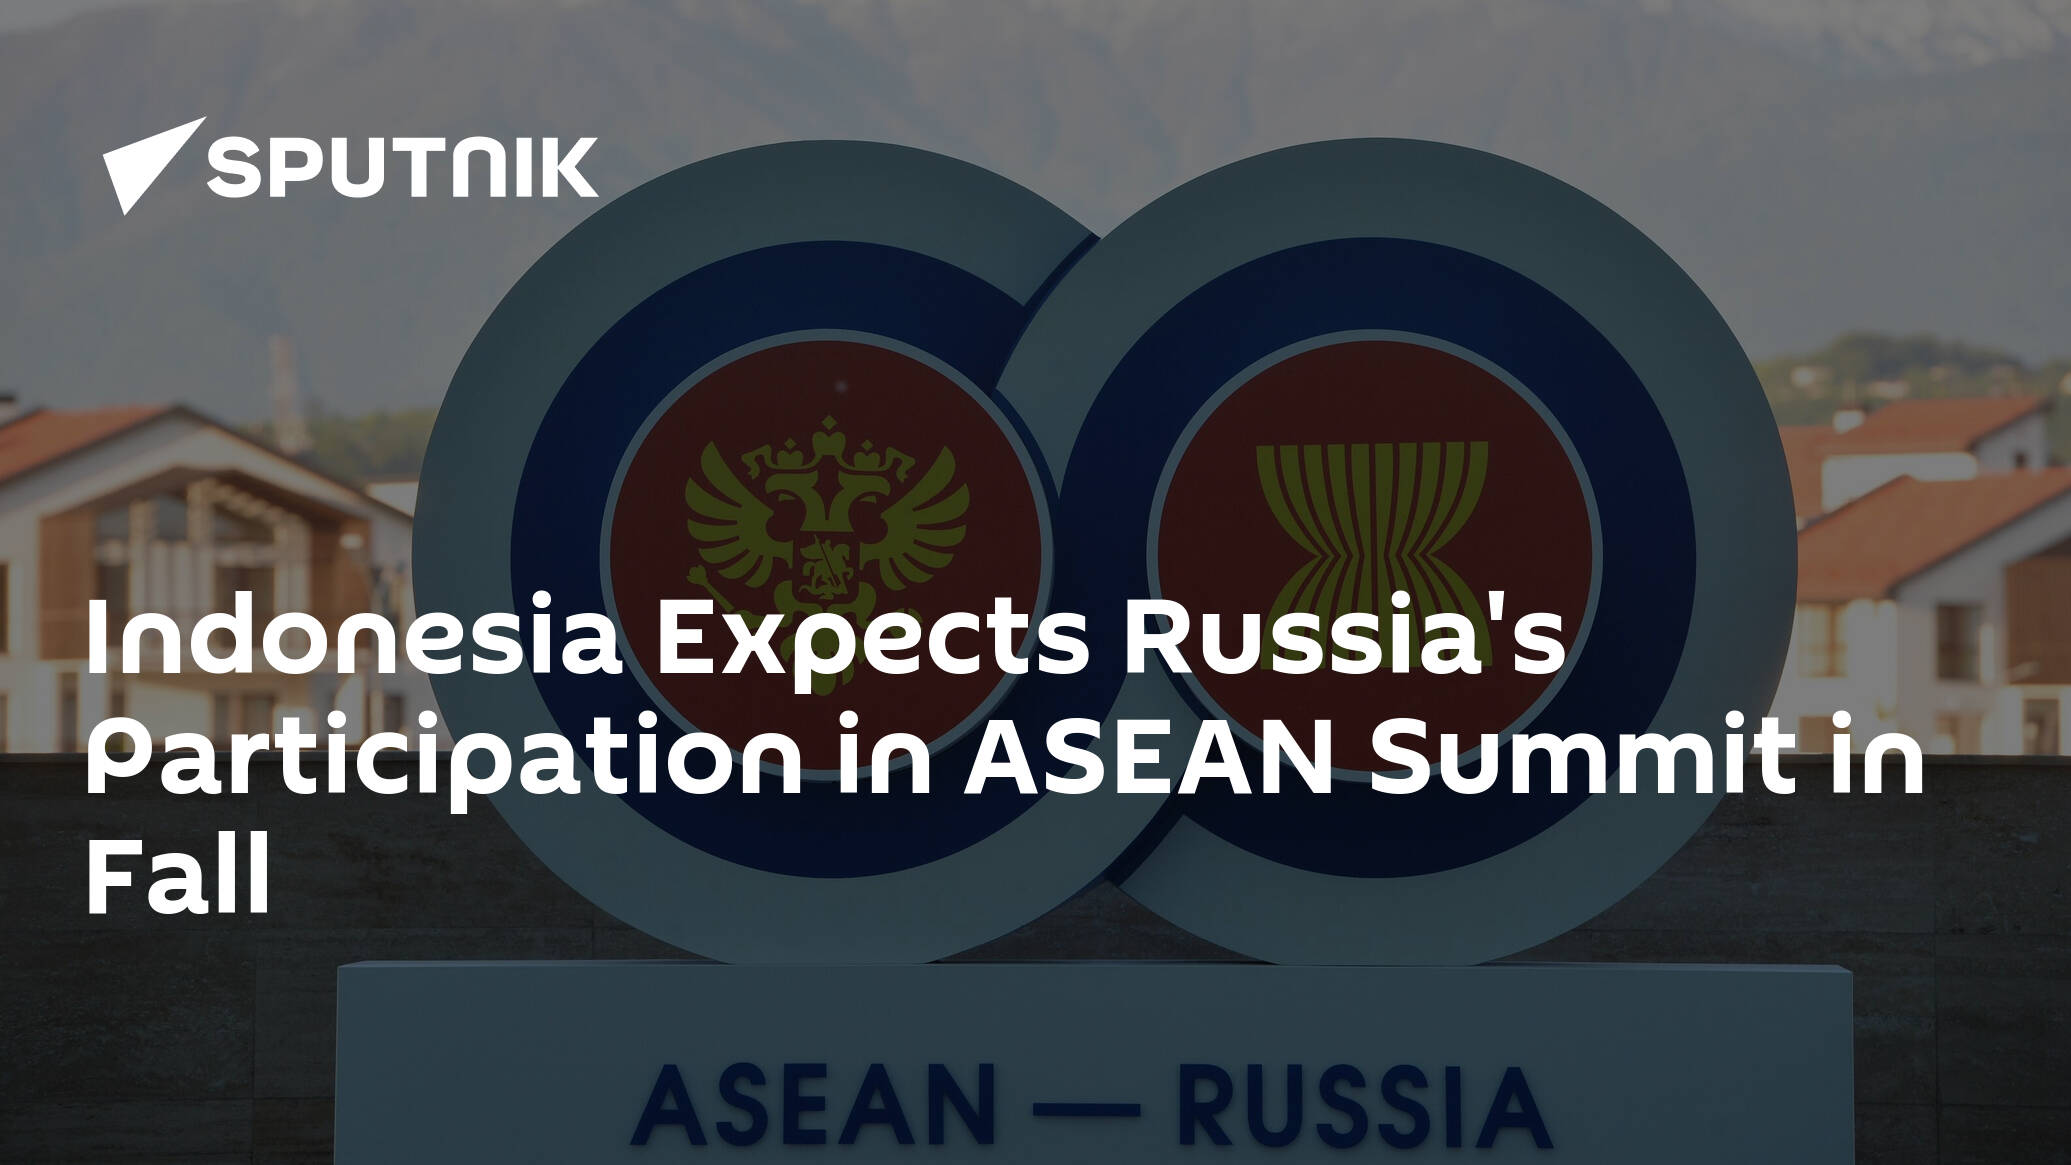 Indonesia Expects Russia's Participation in ASEAN Summit in Fall